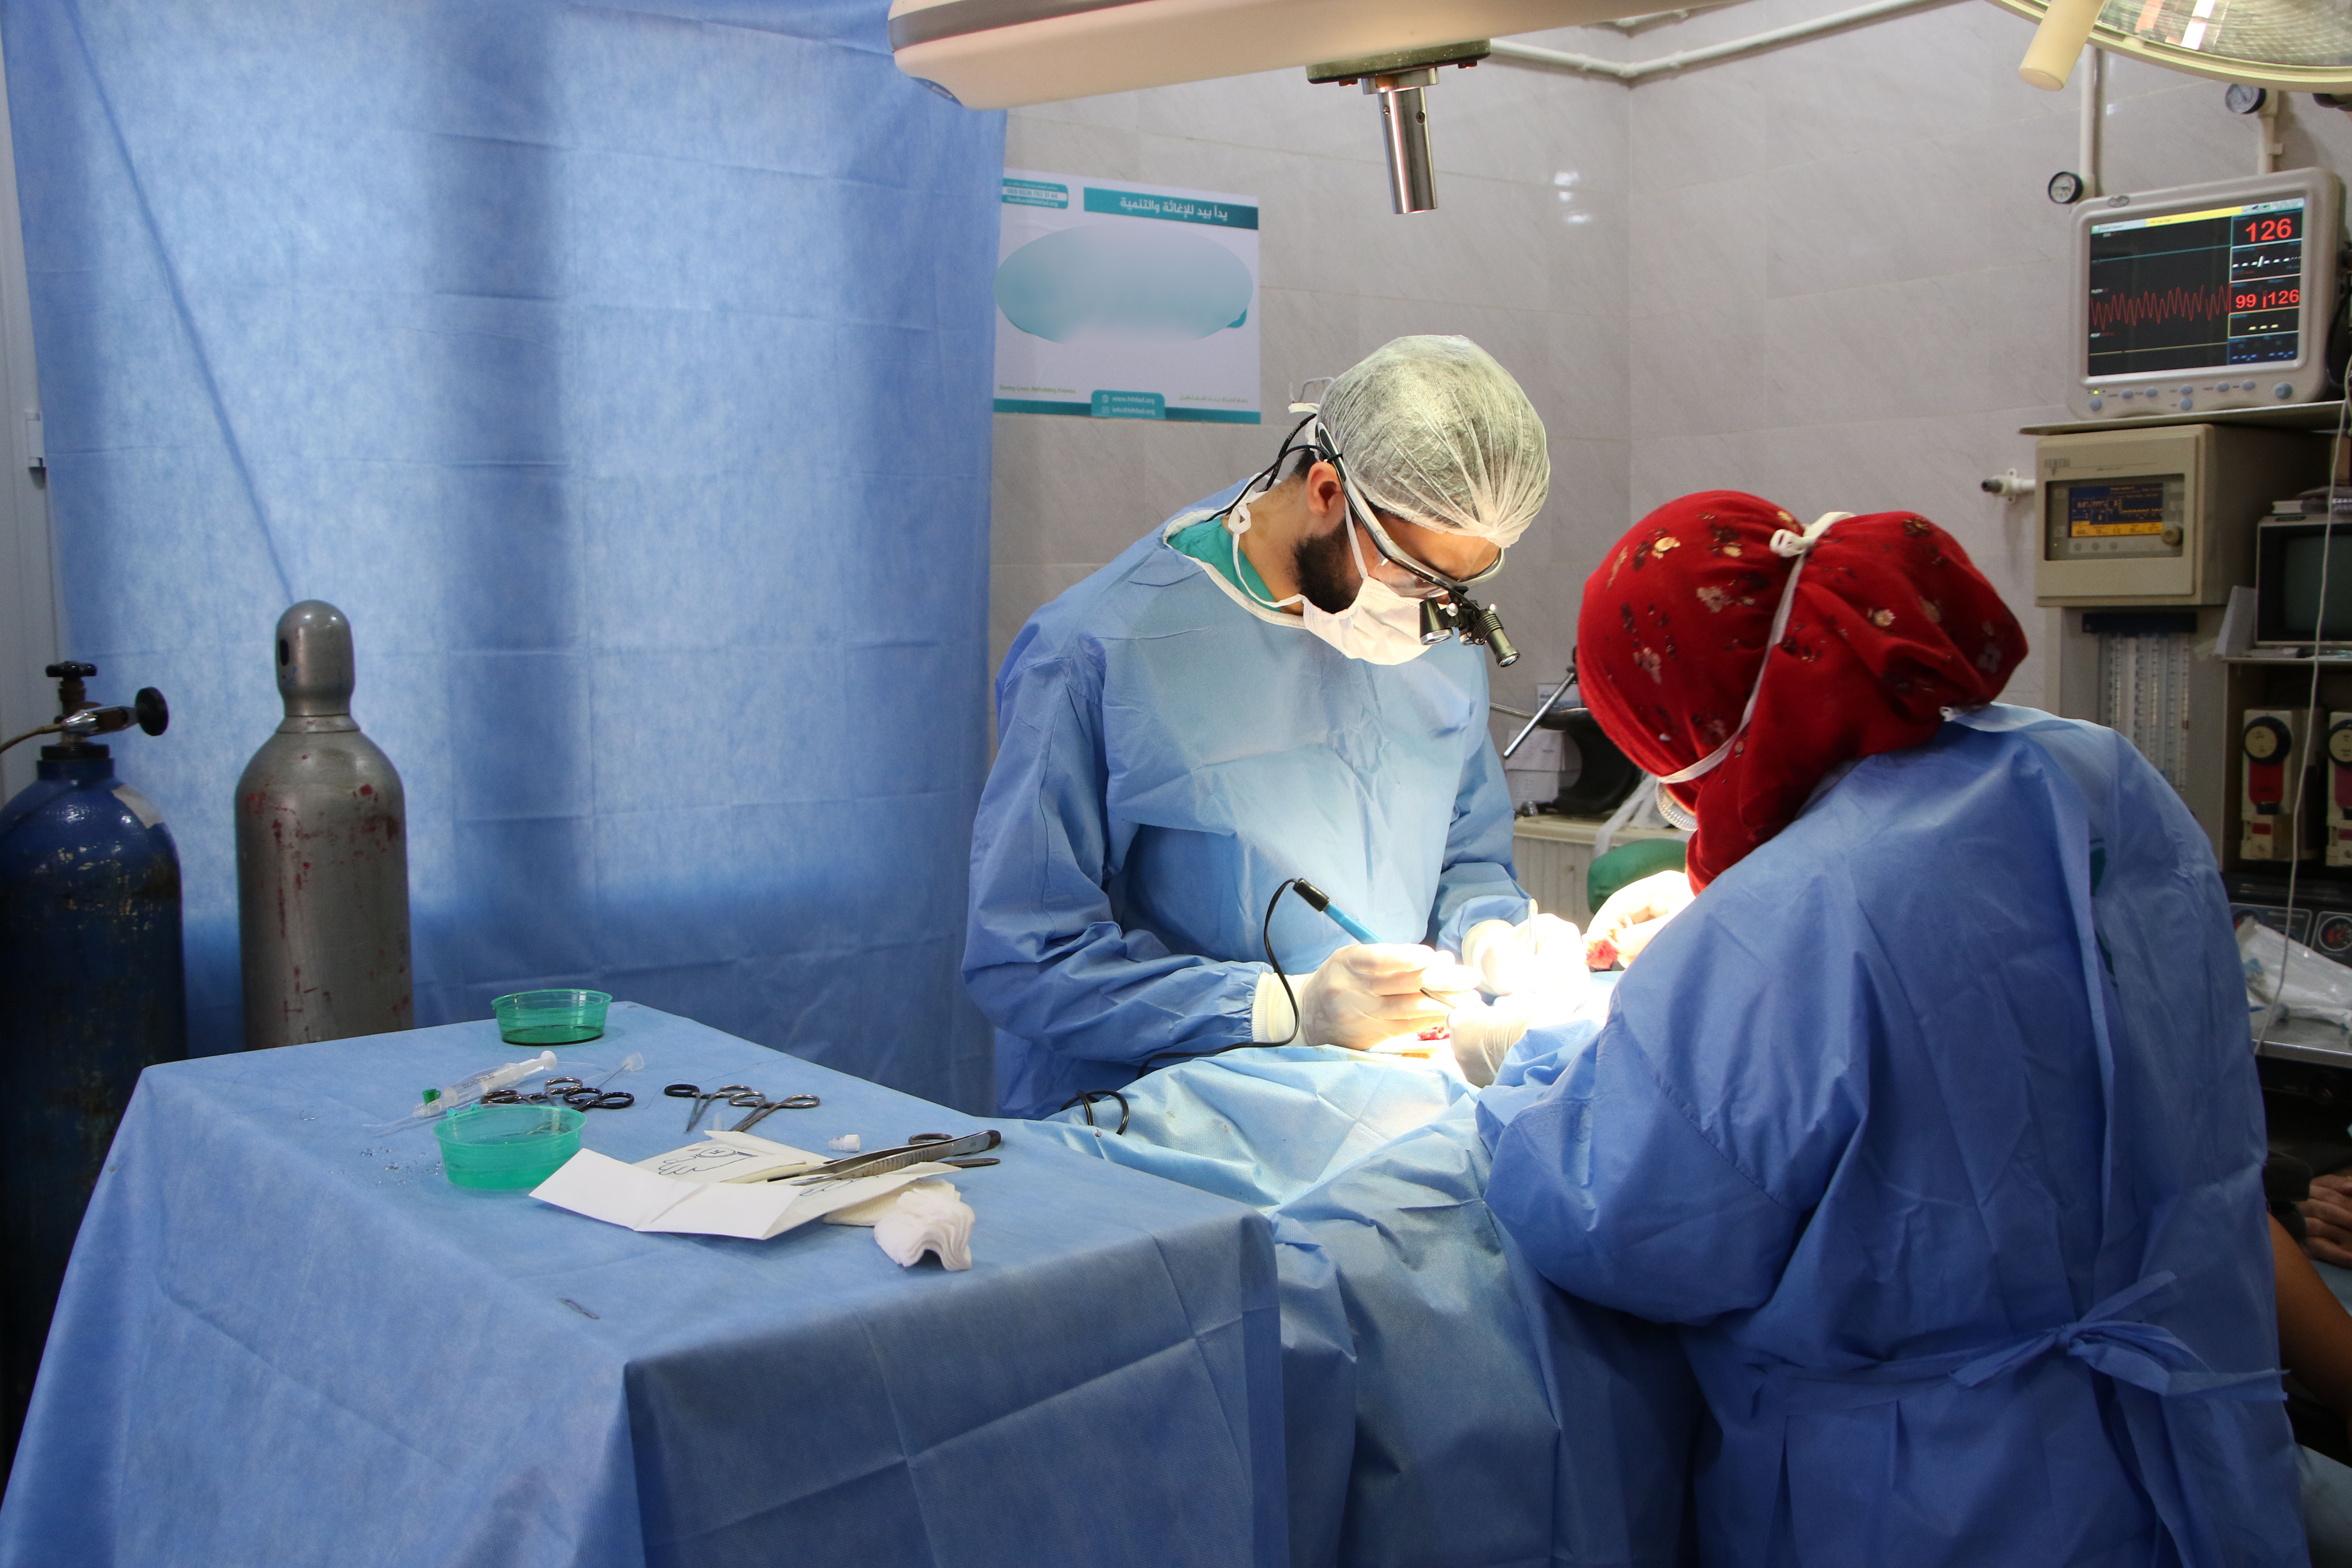 A beneficiary undergoing surgery near the stomach area at the paediatric clinic funded by EU Humanitarian Aid.